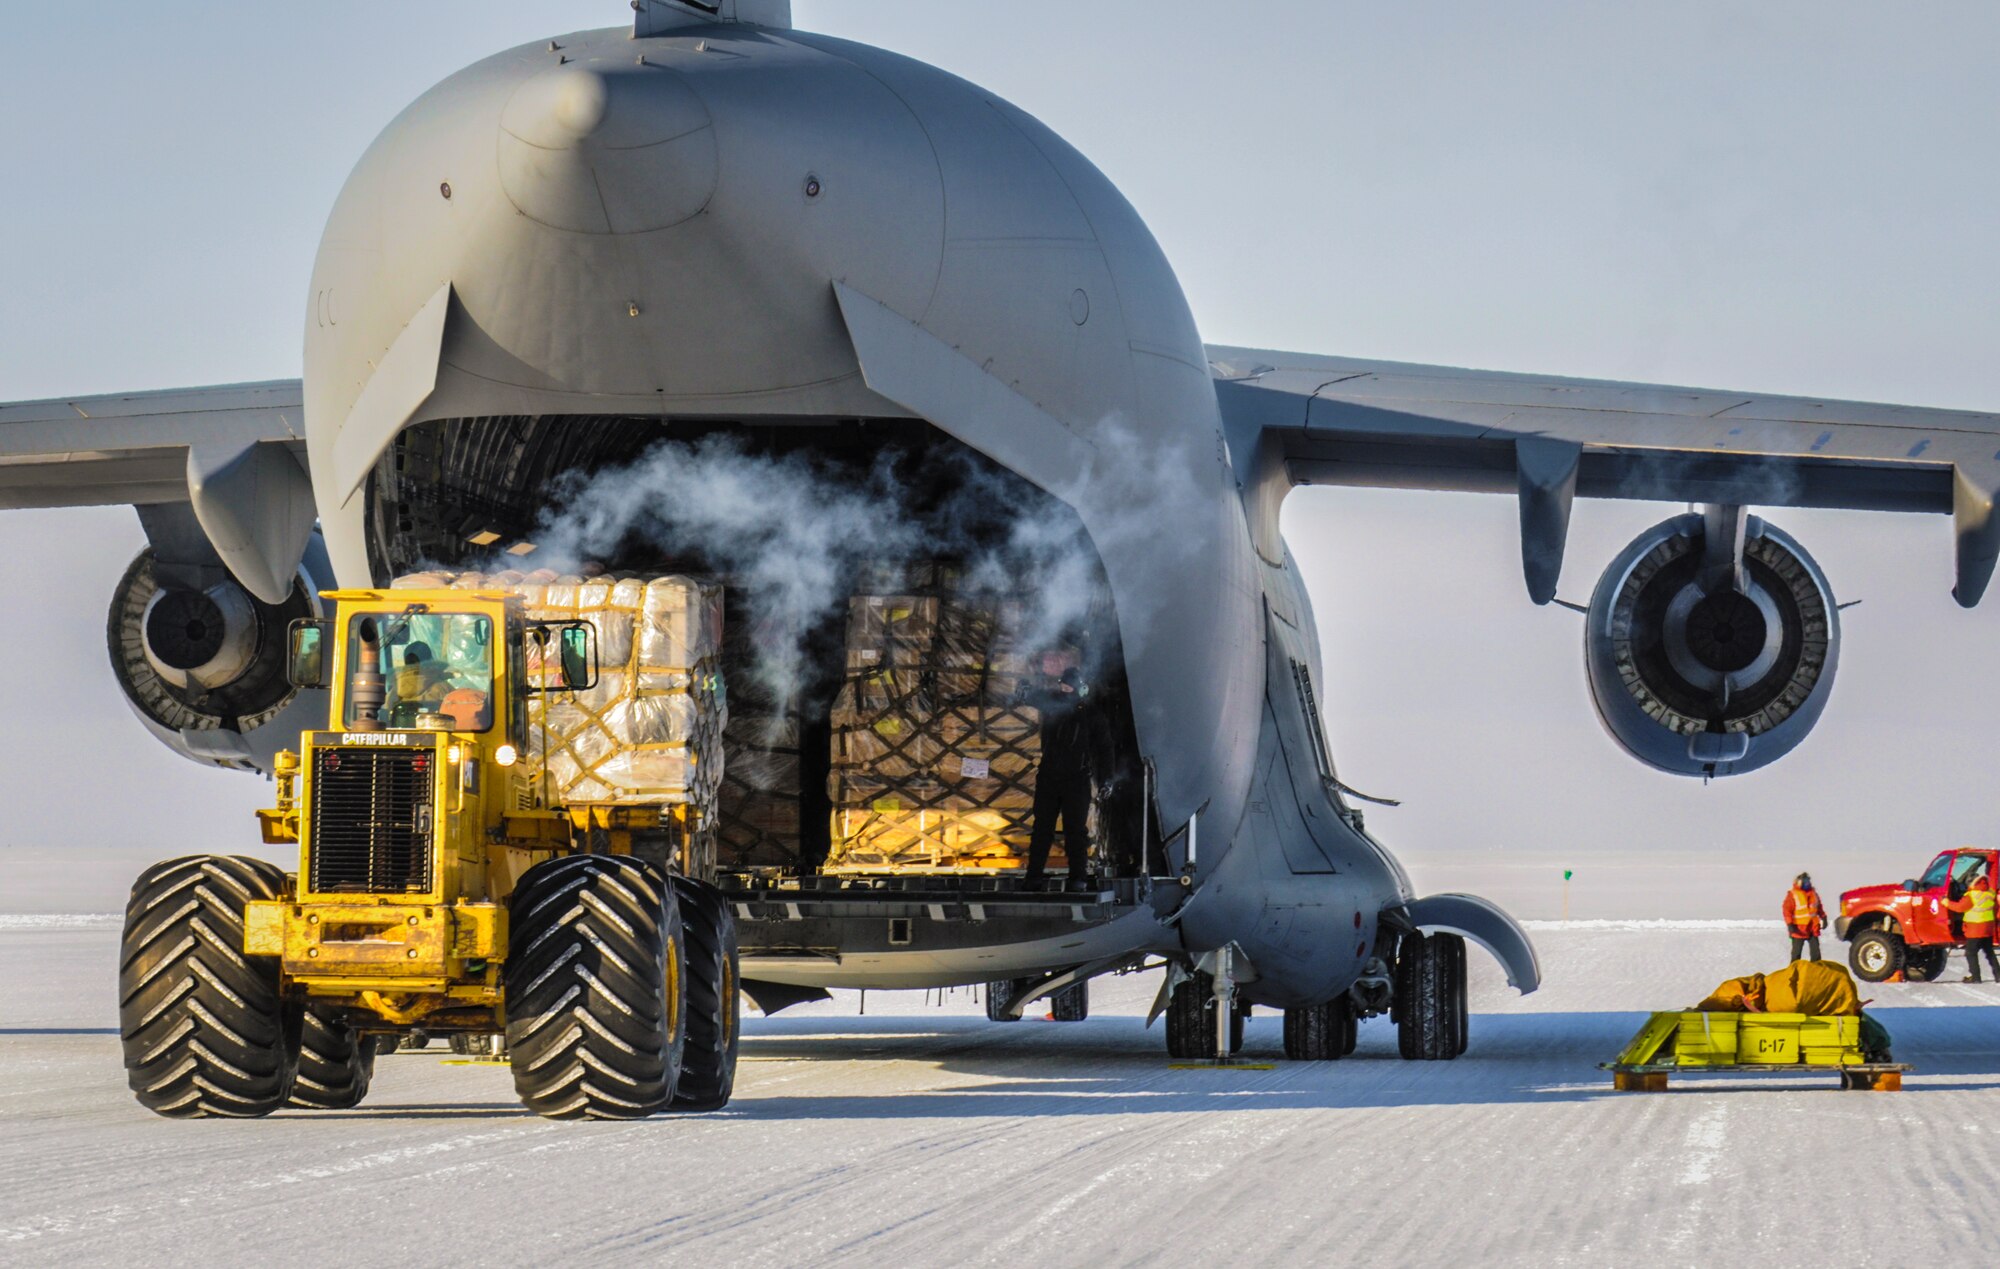 A C-17 Globemaster III aircraft from Joint Base Lewis-McChord, Wash., is off-loaded by a forklift, Oct. 1, 2012, at McMurdo Station, Antarctica. The plane delivered 64,000 pounds of cargo and 76 passengers to the research station in its first Operation Deep Freeze mission of the 2012-2013 main season. (U.S. Air Force photo/Staff Sgt. Sean Tobin)